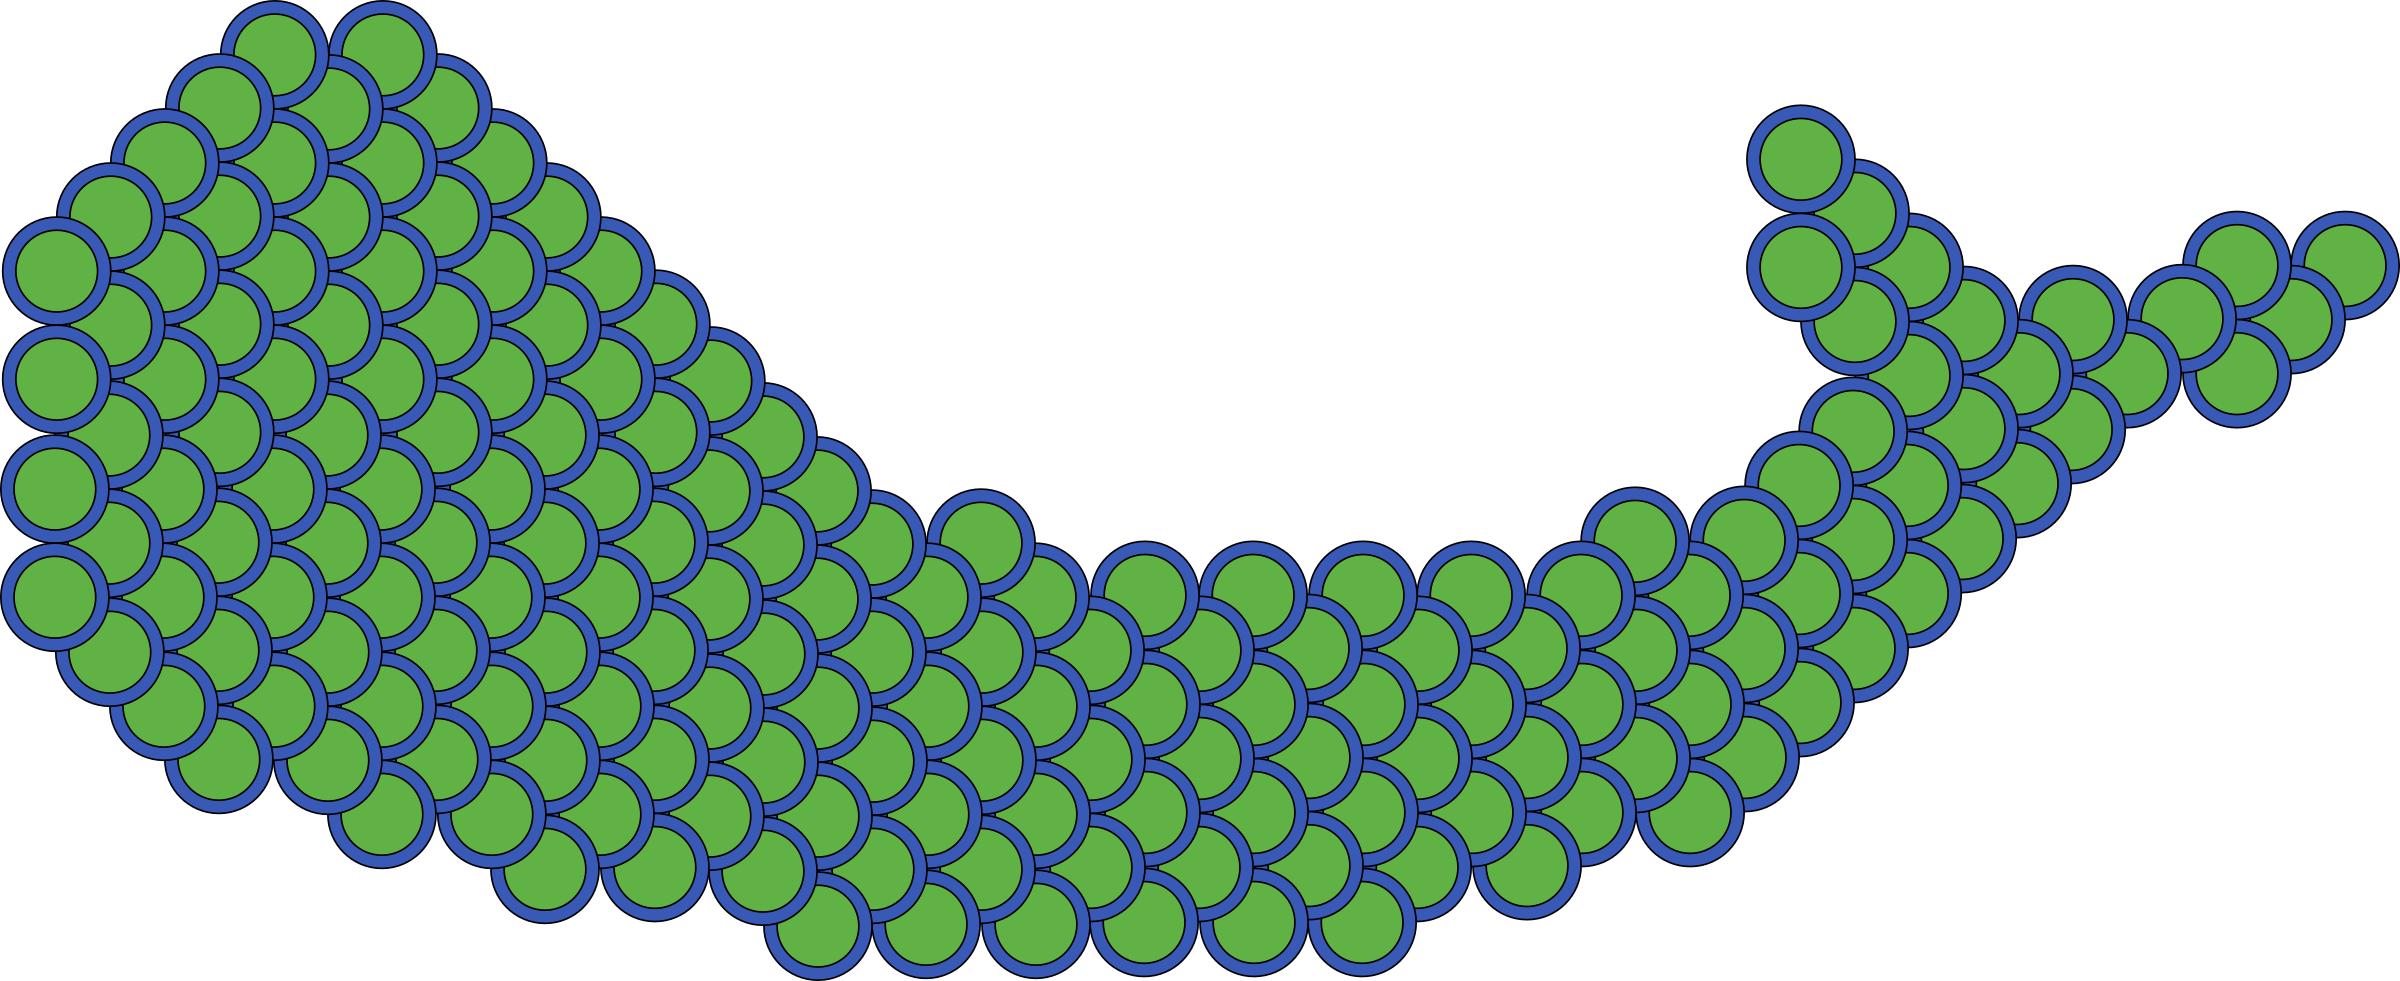 Scales flattened onto fish png